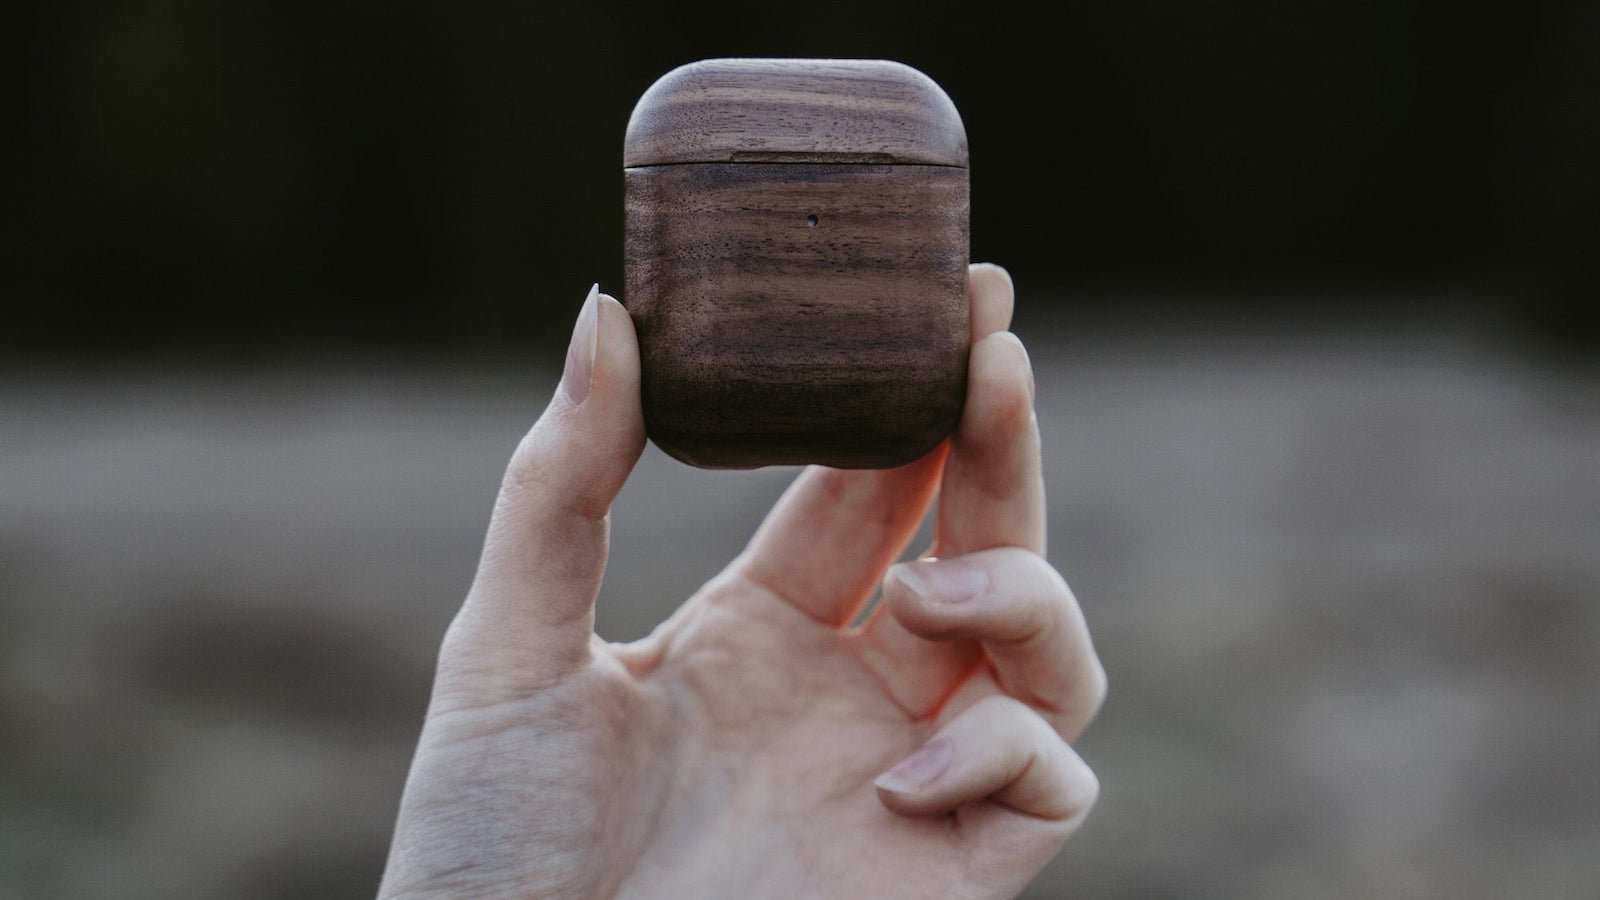 Oakywood Wooden AirPods Case protects your earbuds against drops and falls